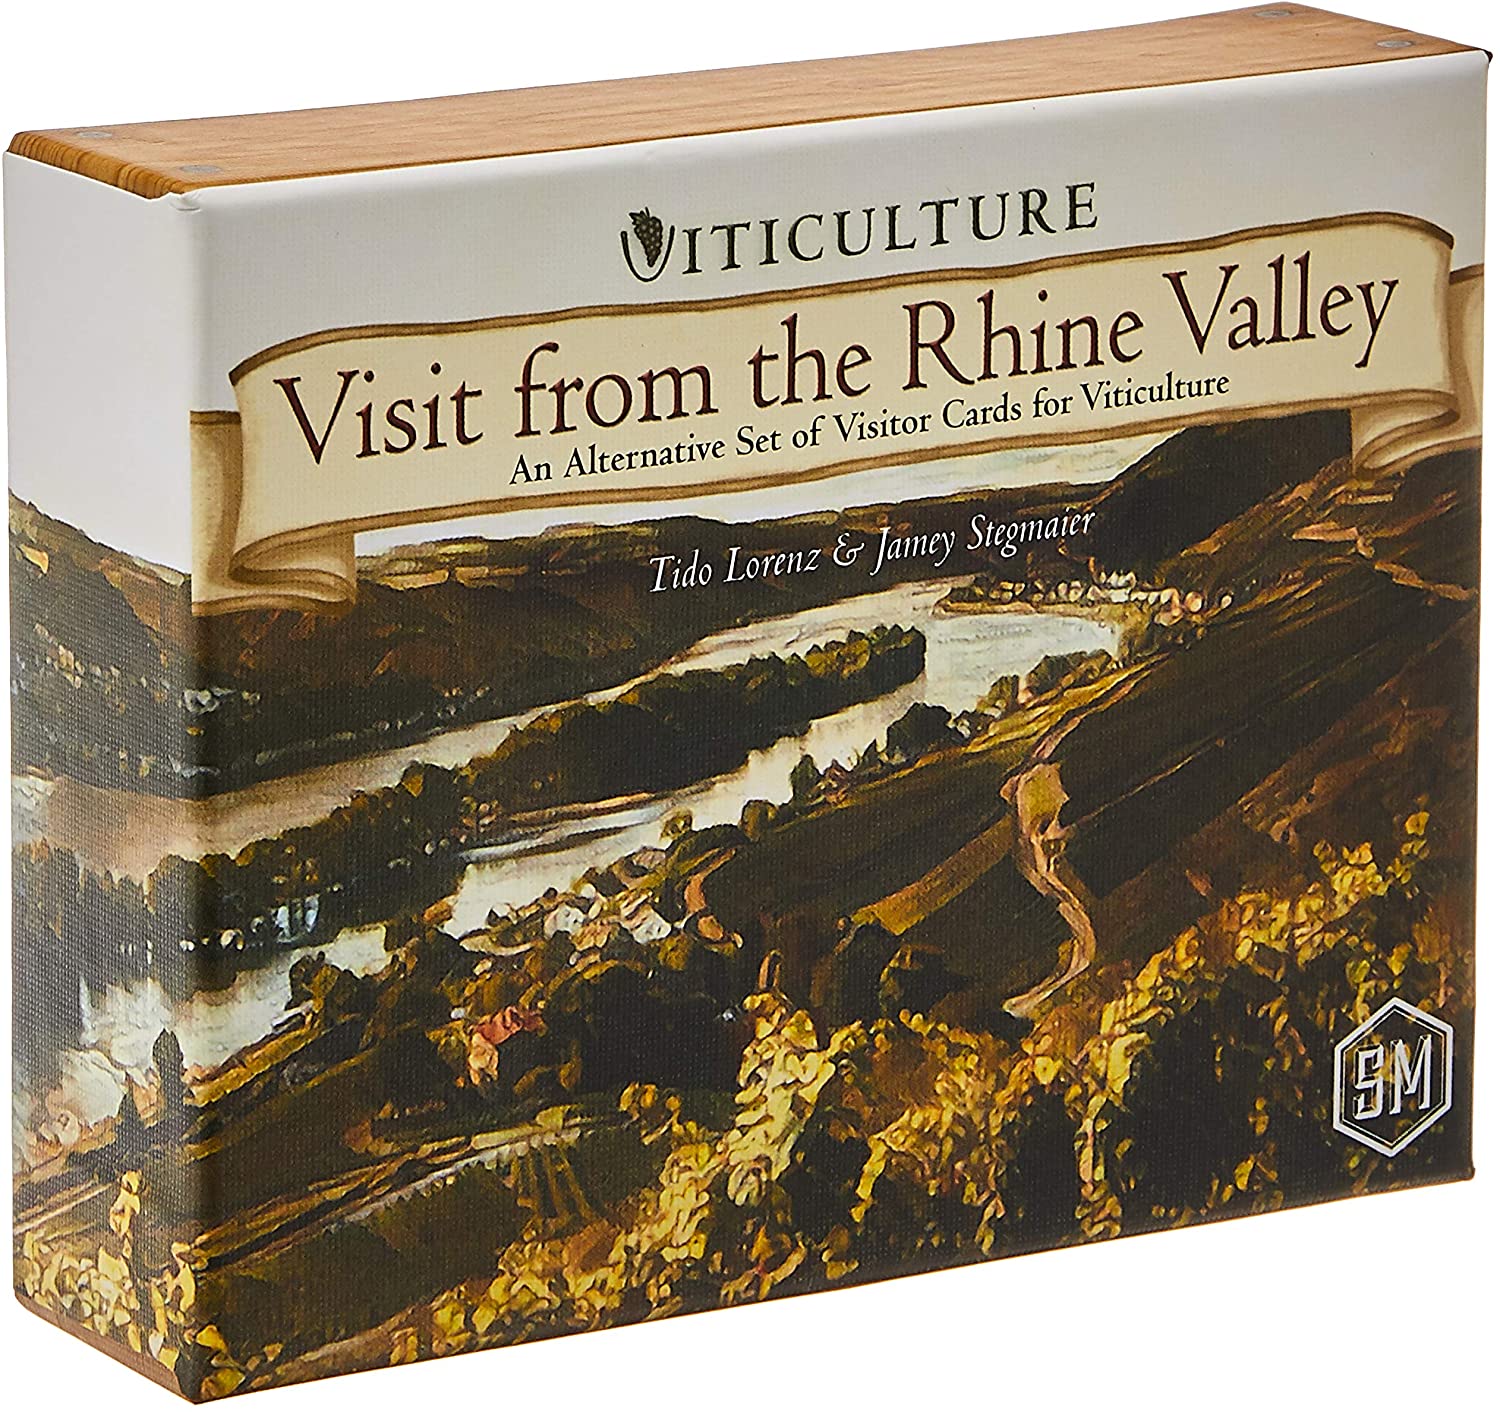 Viticulture - Visit from the Rhine Valley